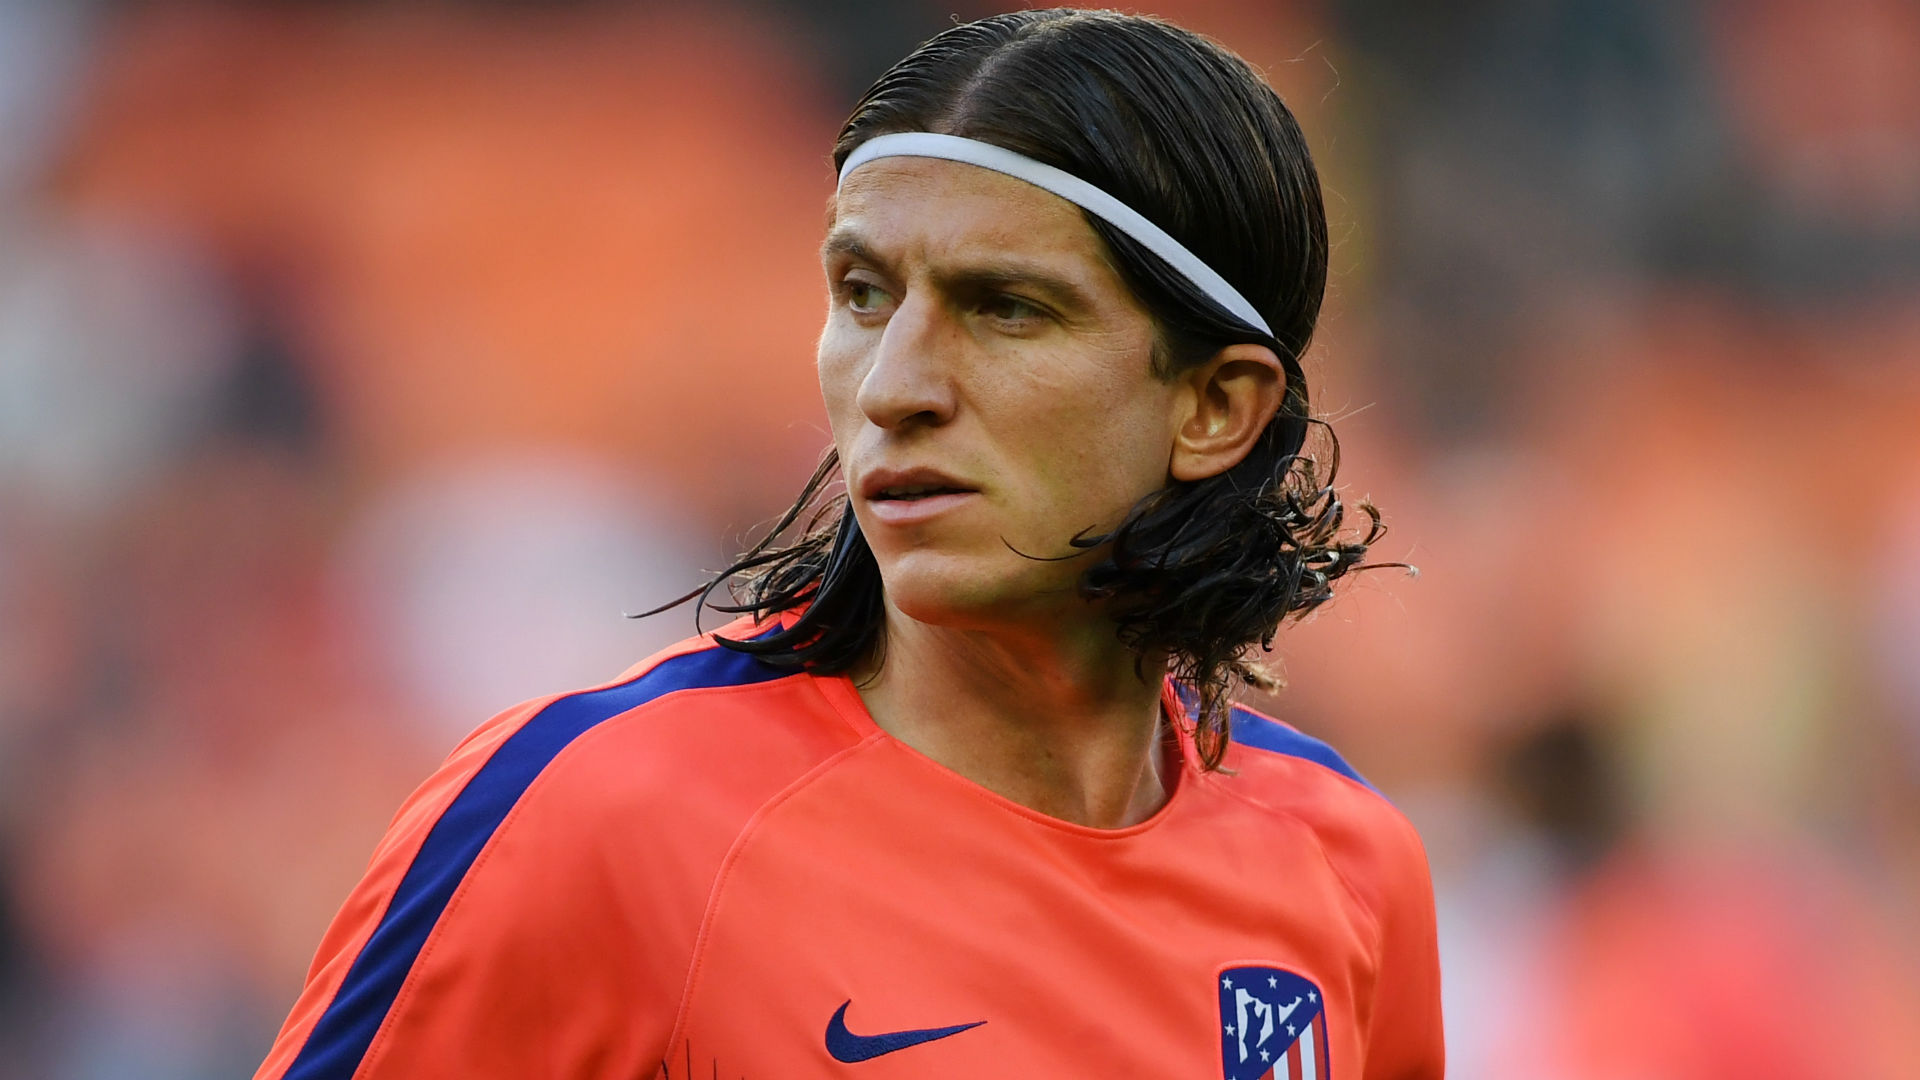 Atletico Madrid have bid farewell to the long-serving Filipe Luis, a member of their title-winning 2013-14 team.